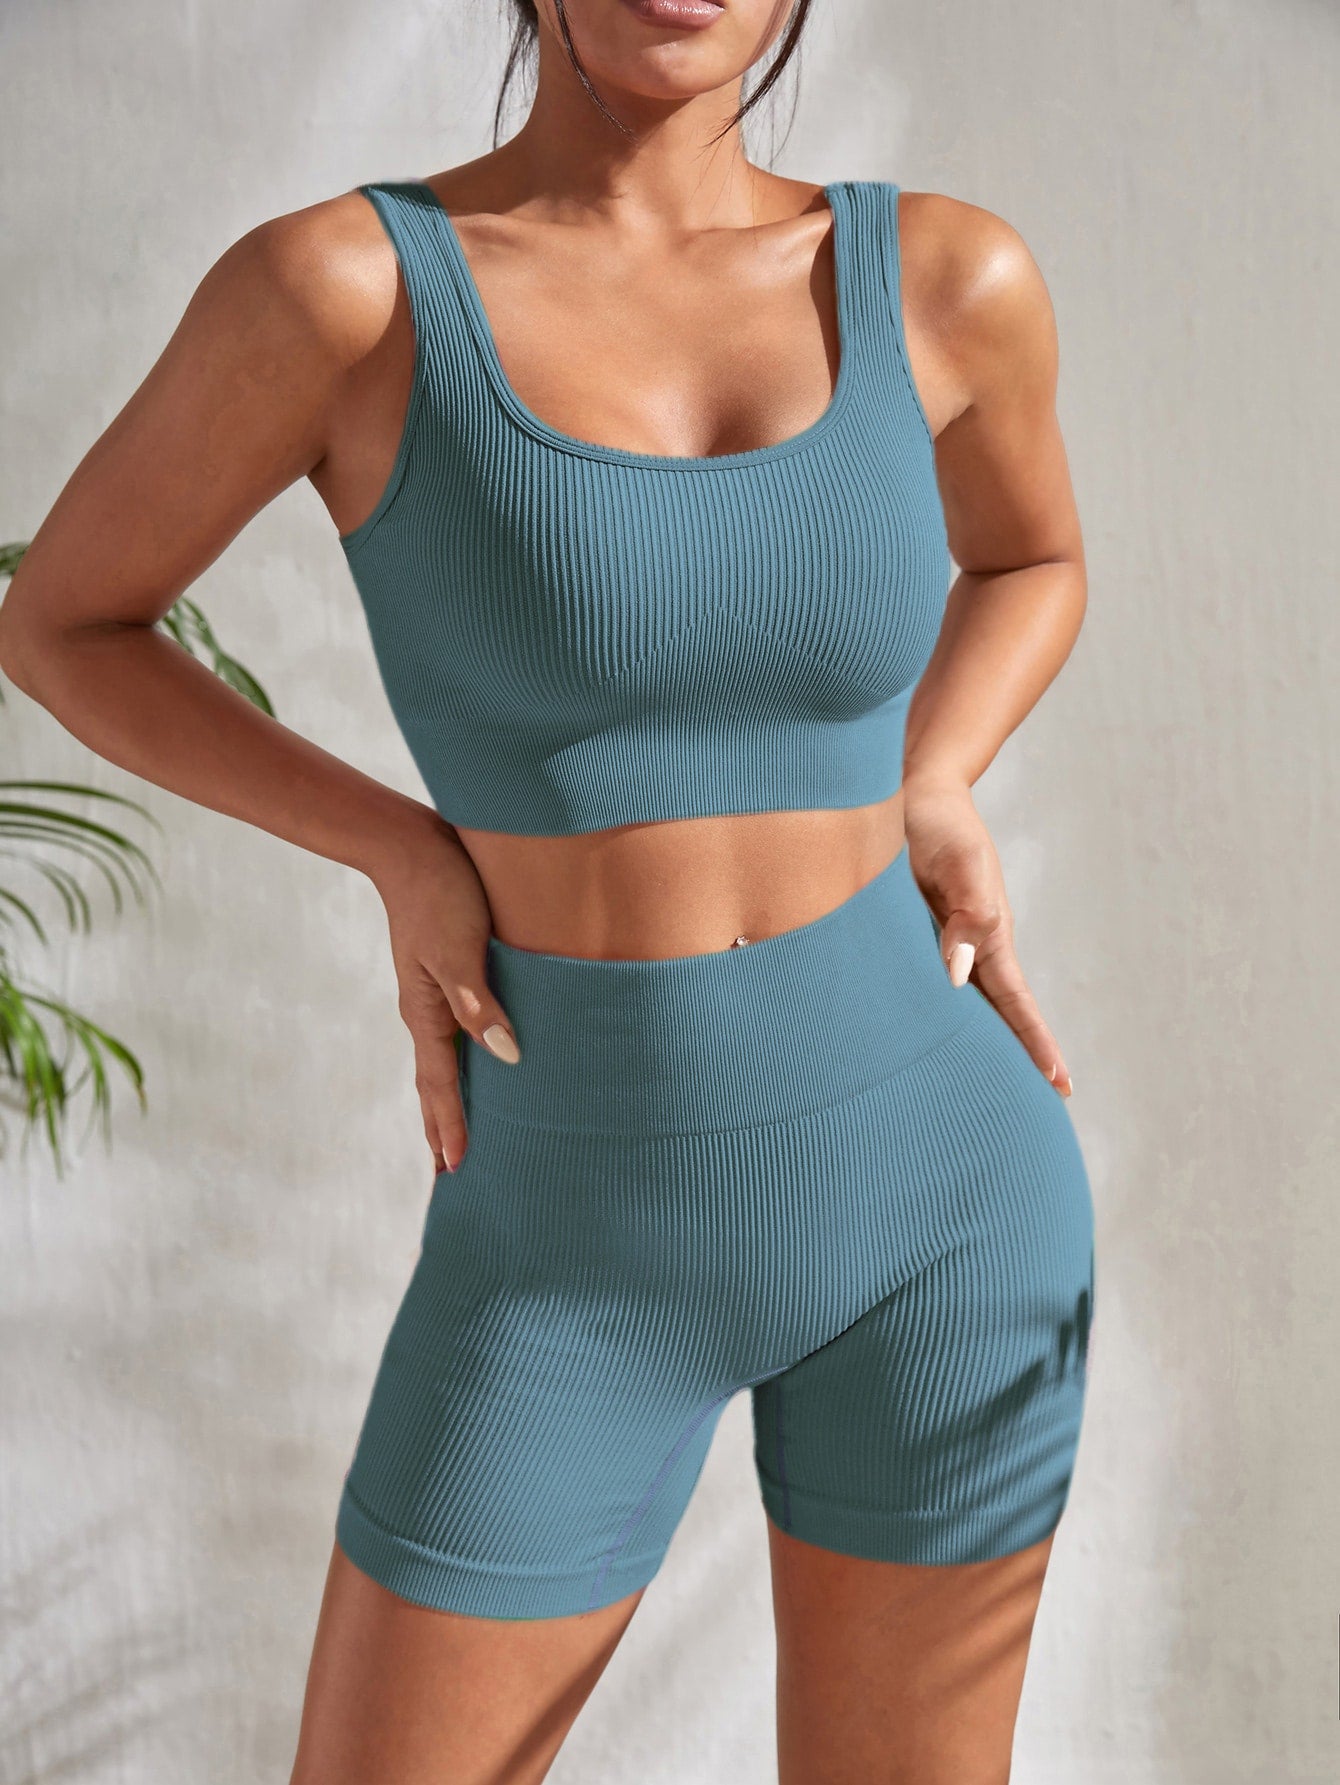 Women's Simple Color Seamless Sports Vest And Shorts Set